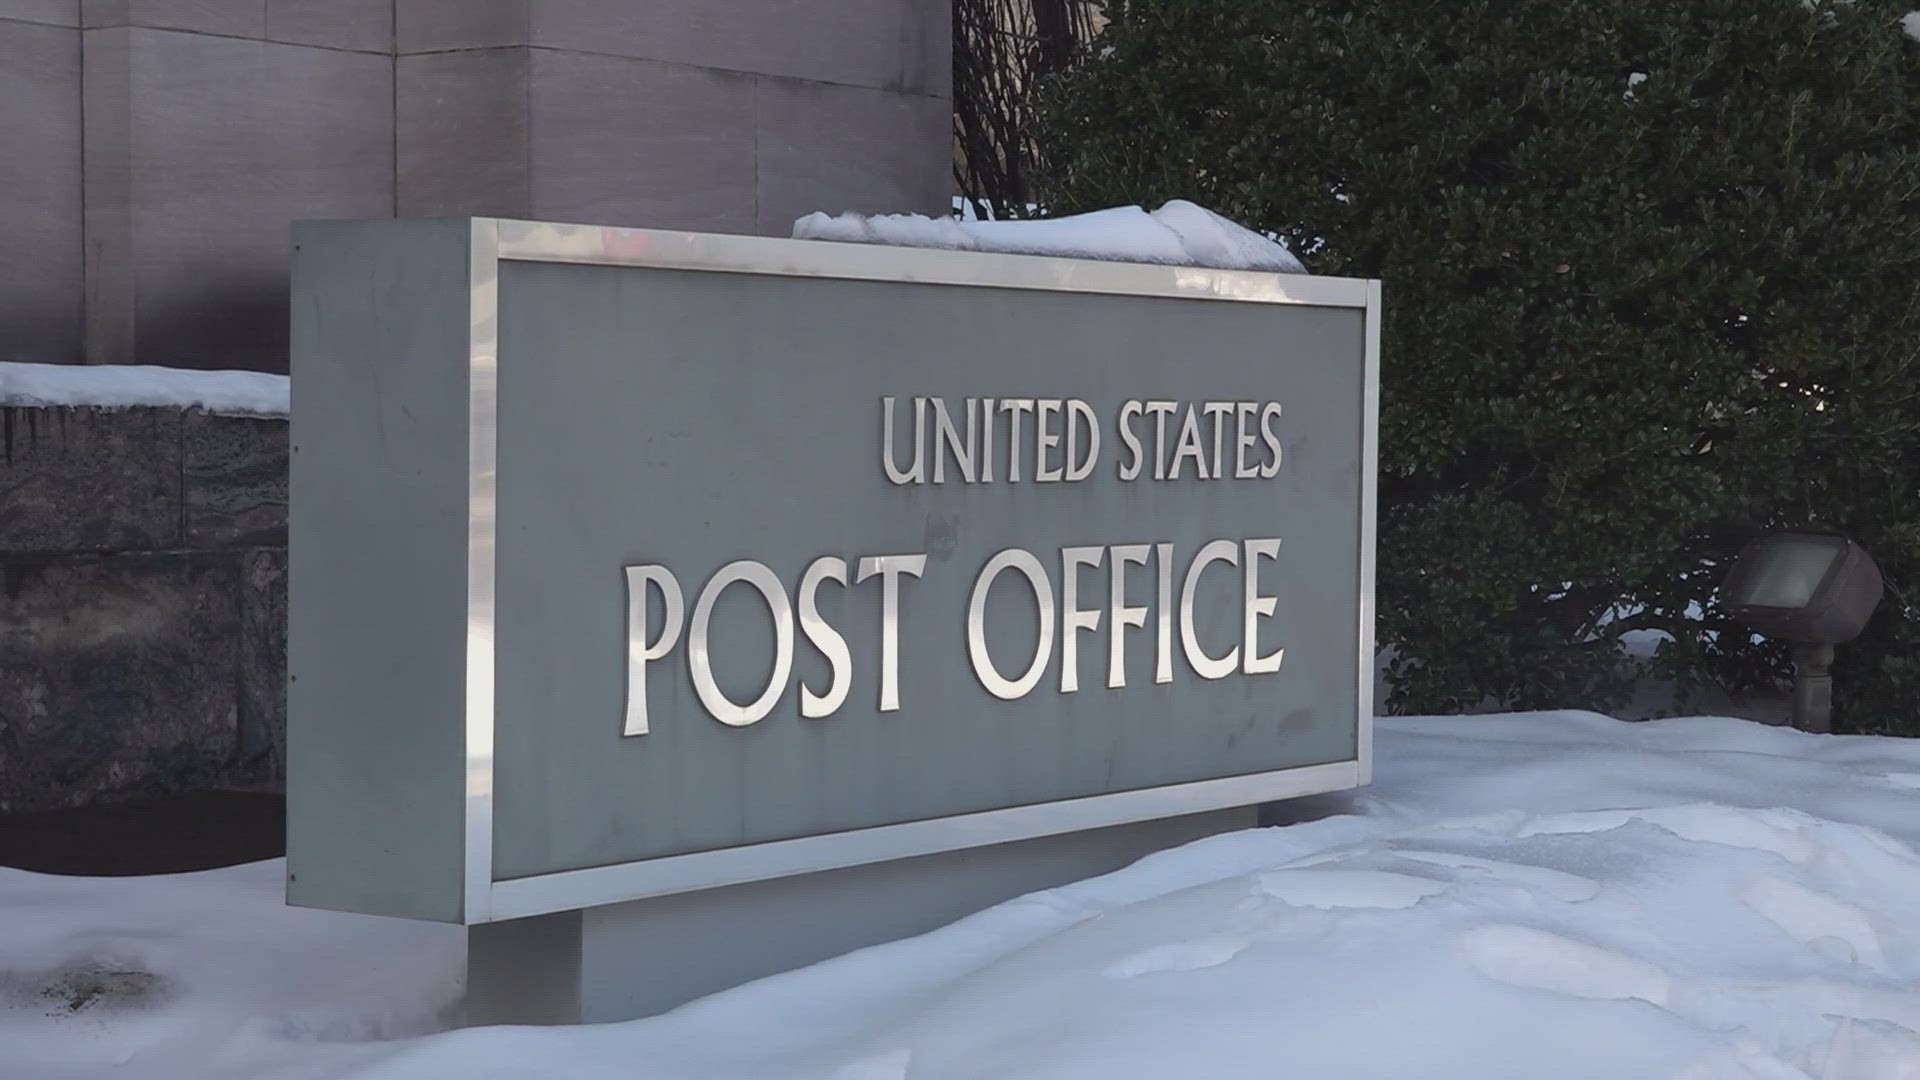 The USPS said mail delivery was delayed in some areas because of safety concerns for its drivers.